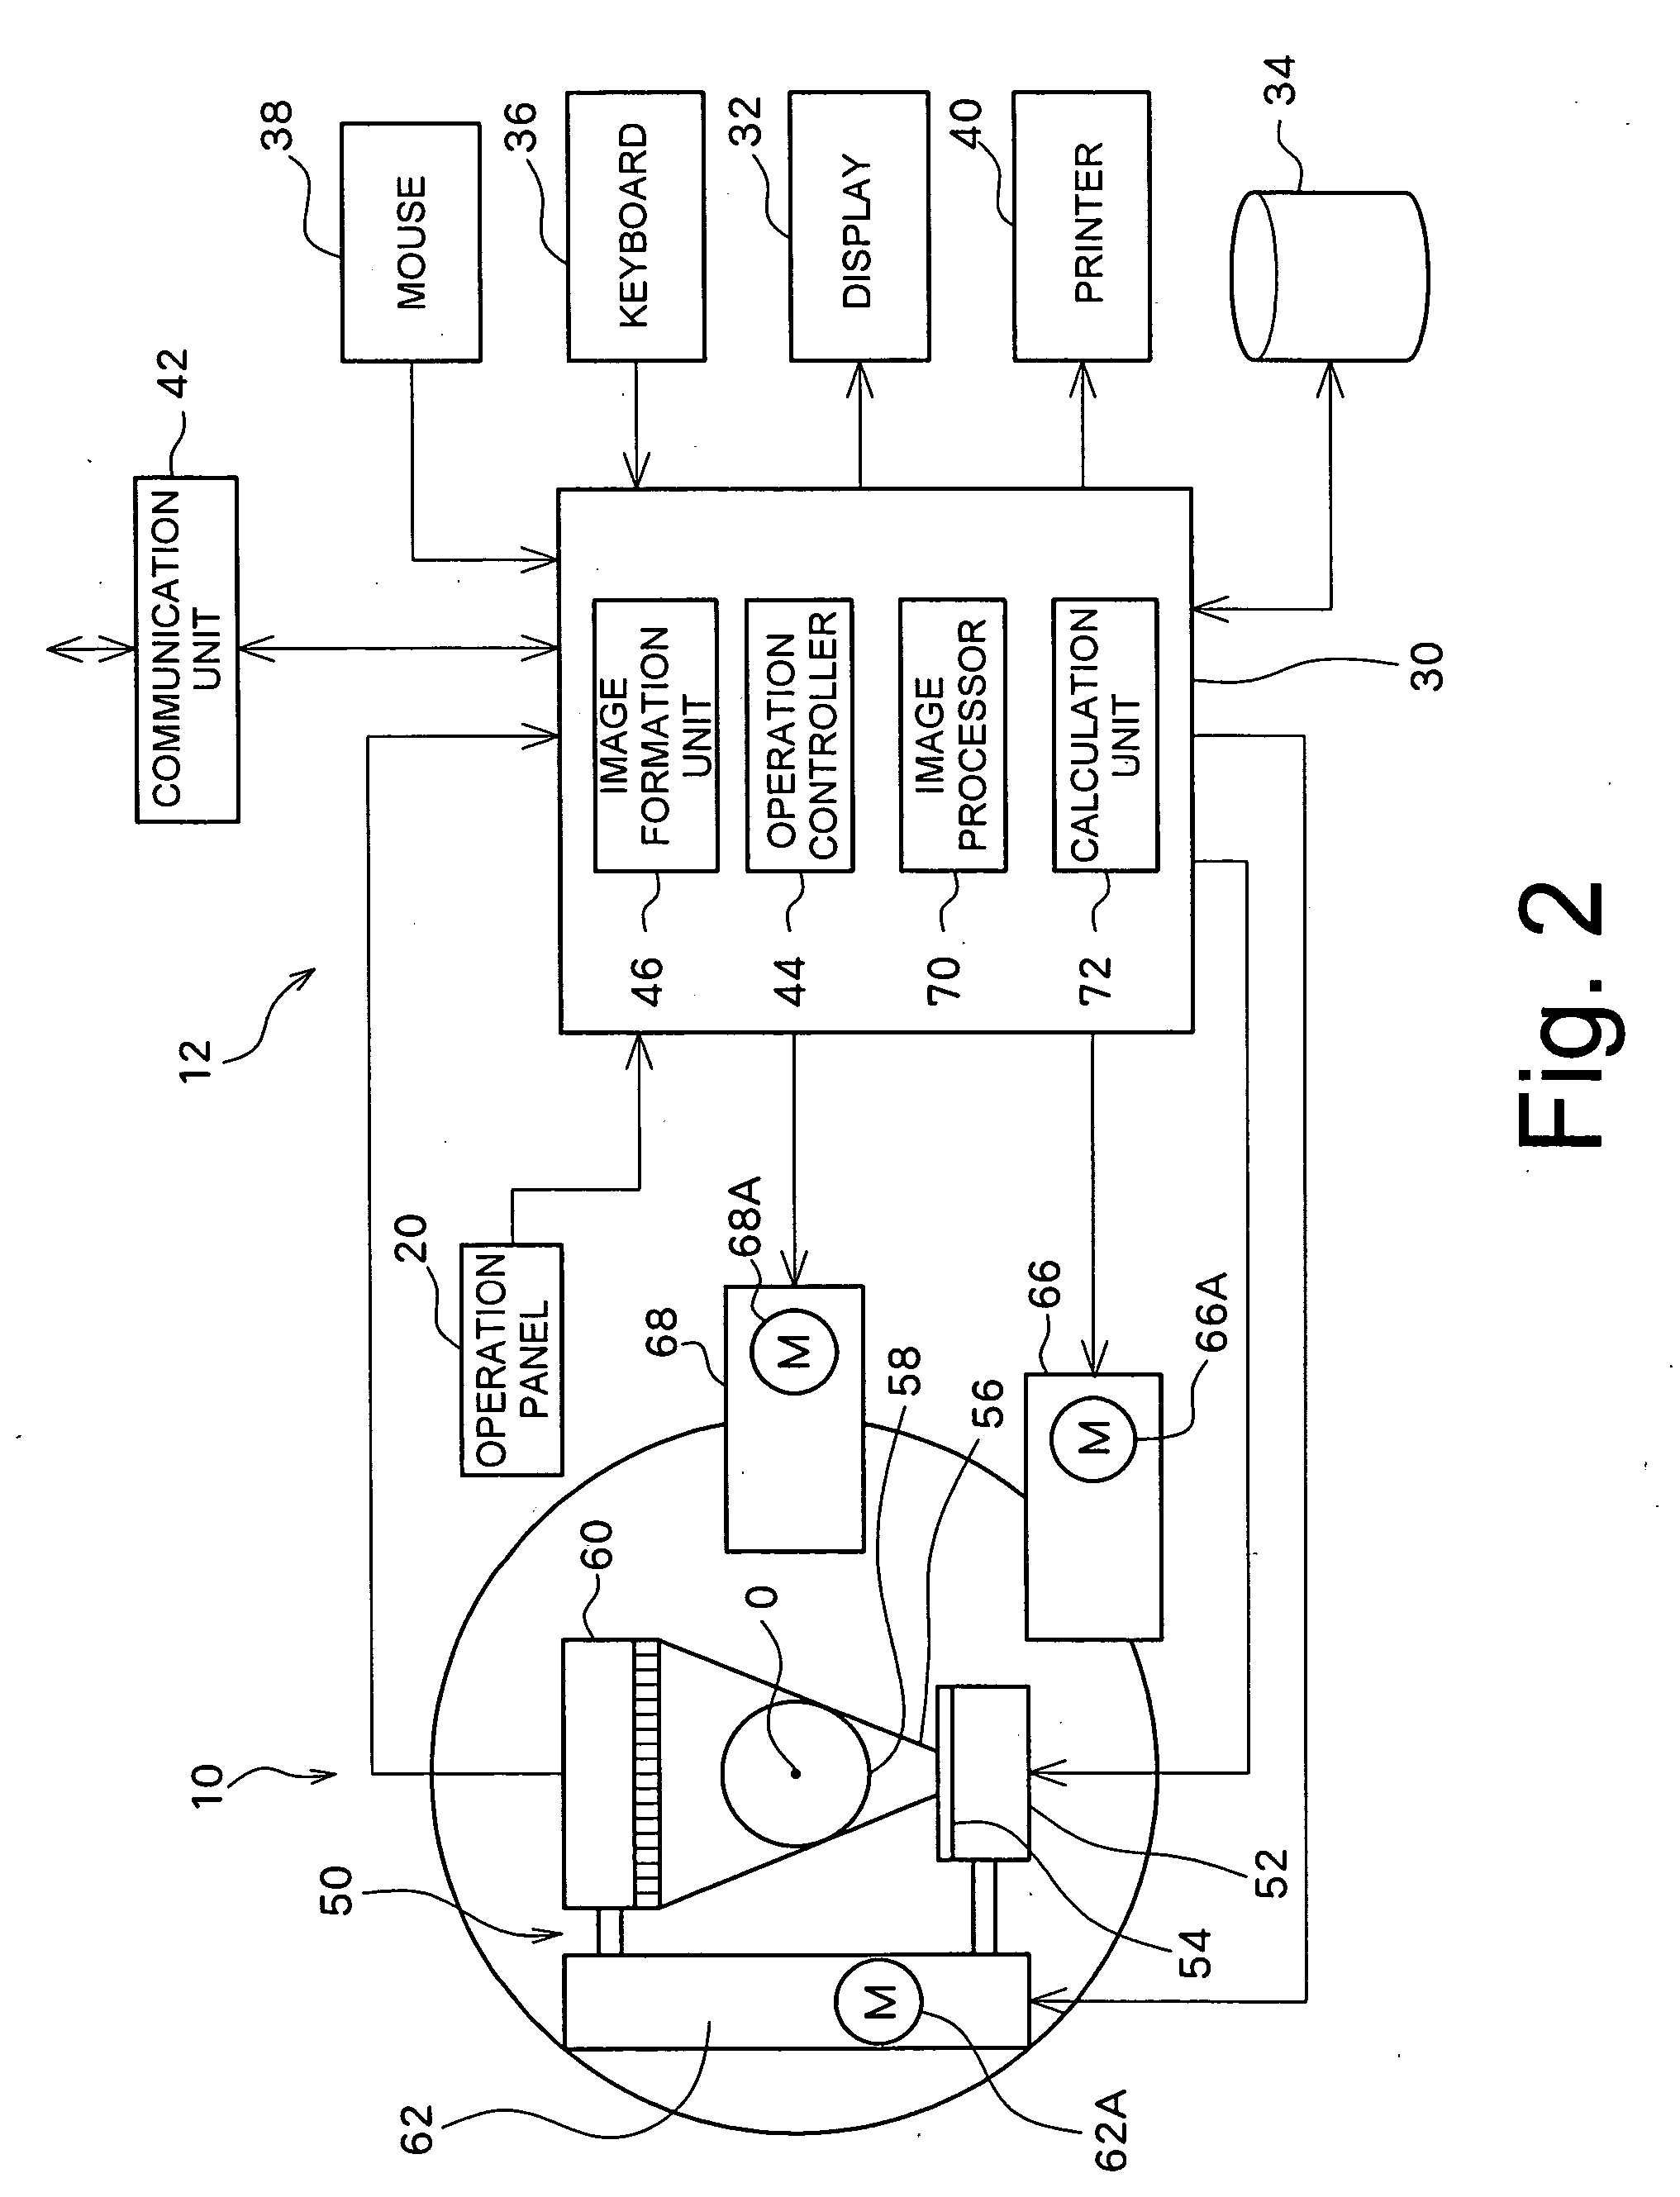 Computerized tomography device using X rays and image processing method